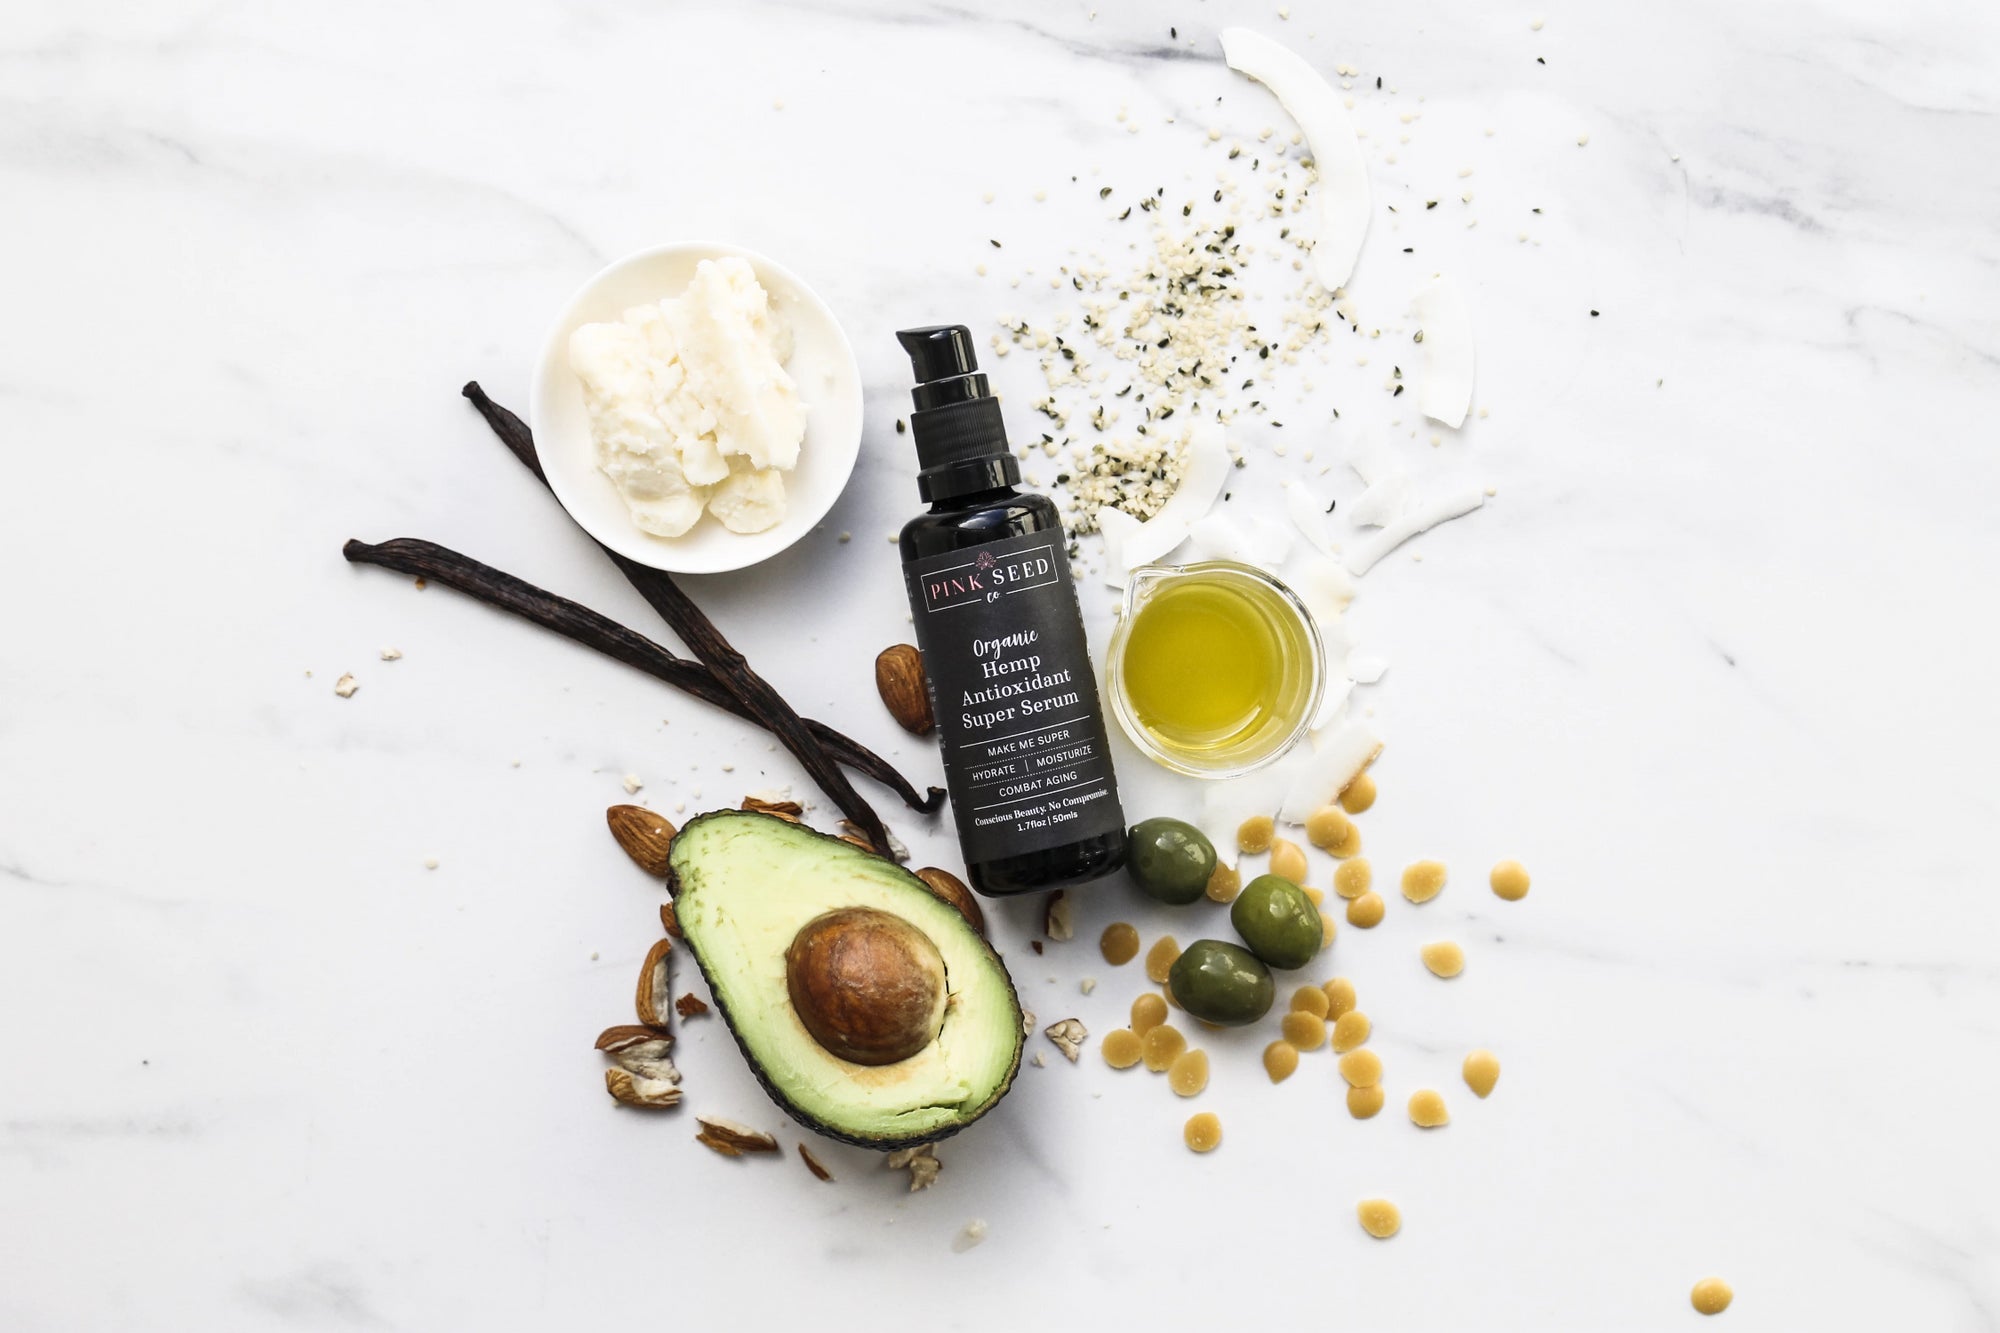 Hemp seed oil, niacinamide and co. - the new superfoods for the skin?